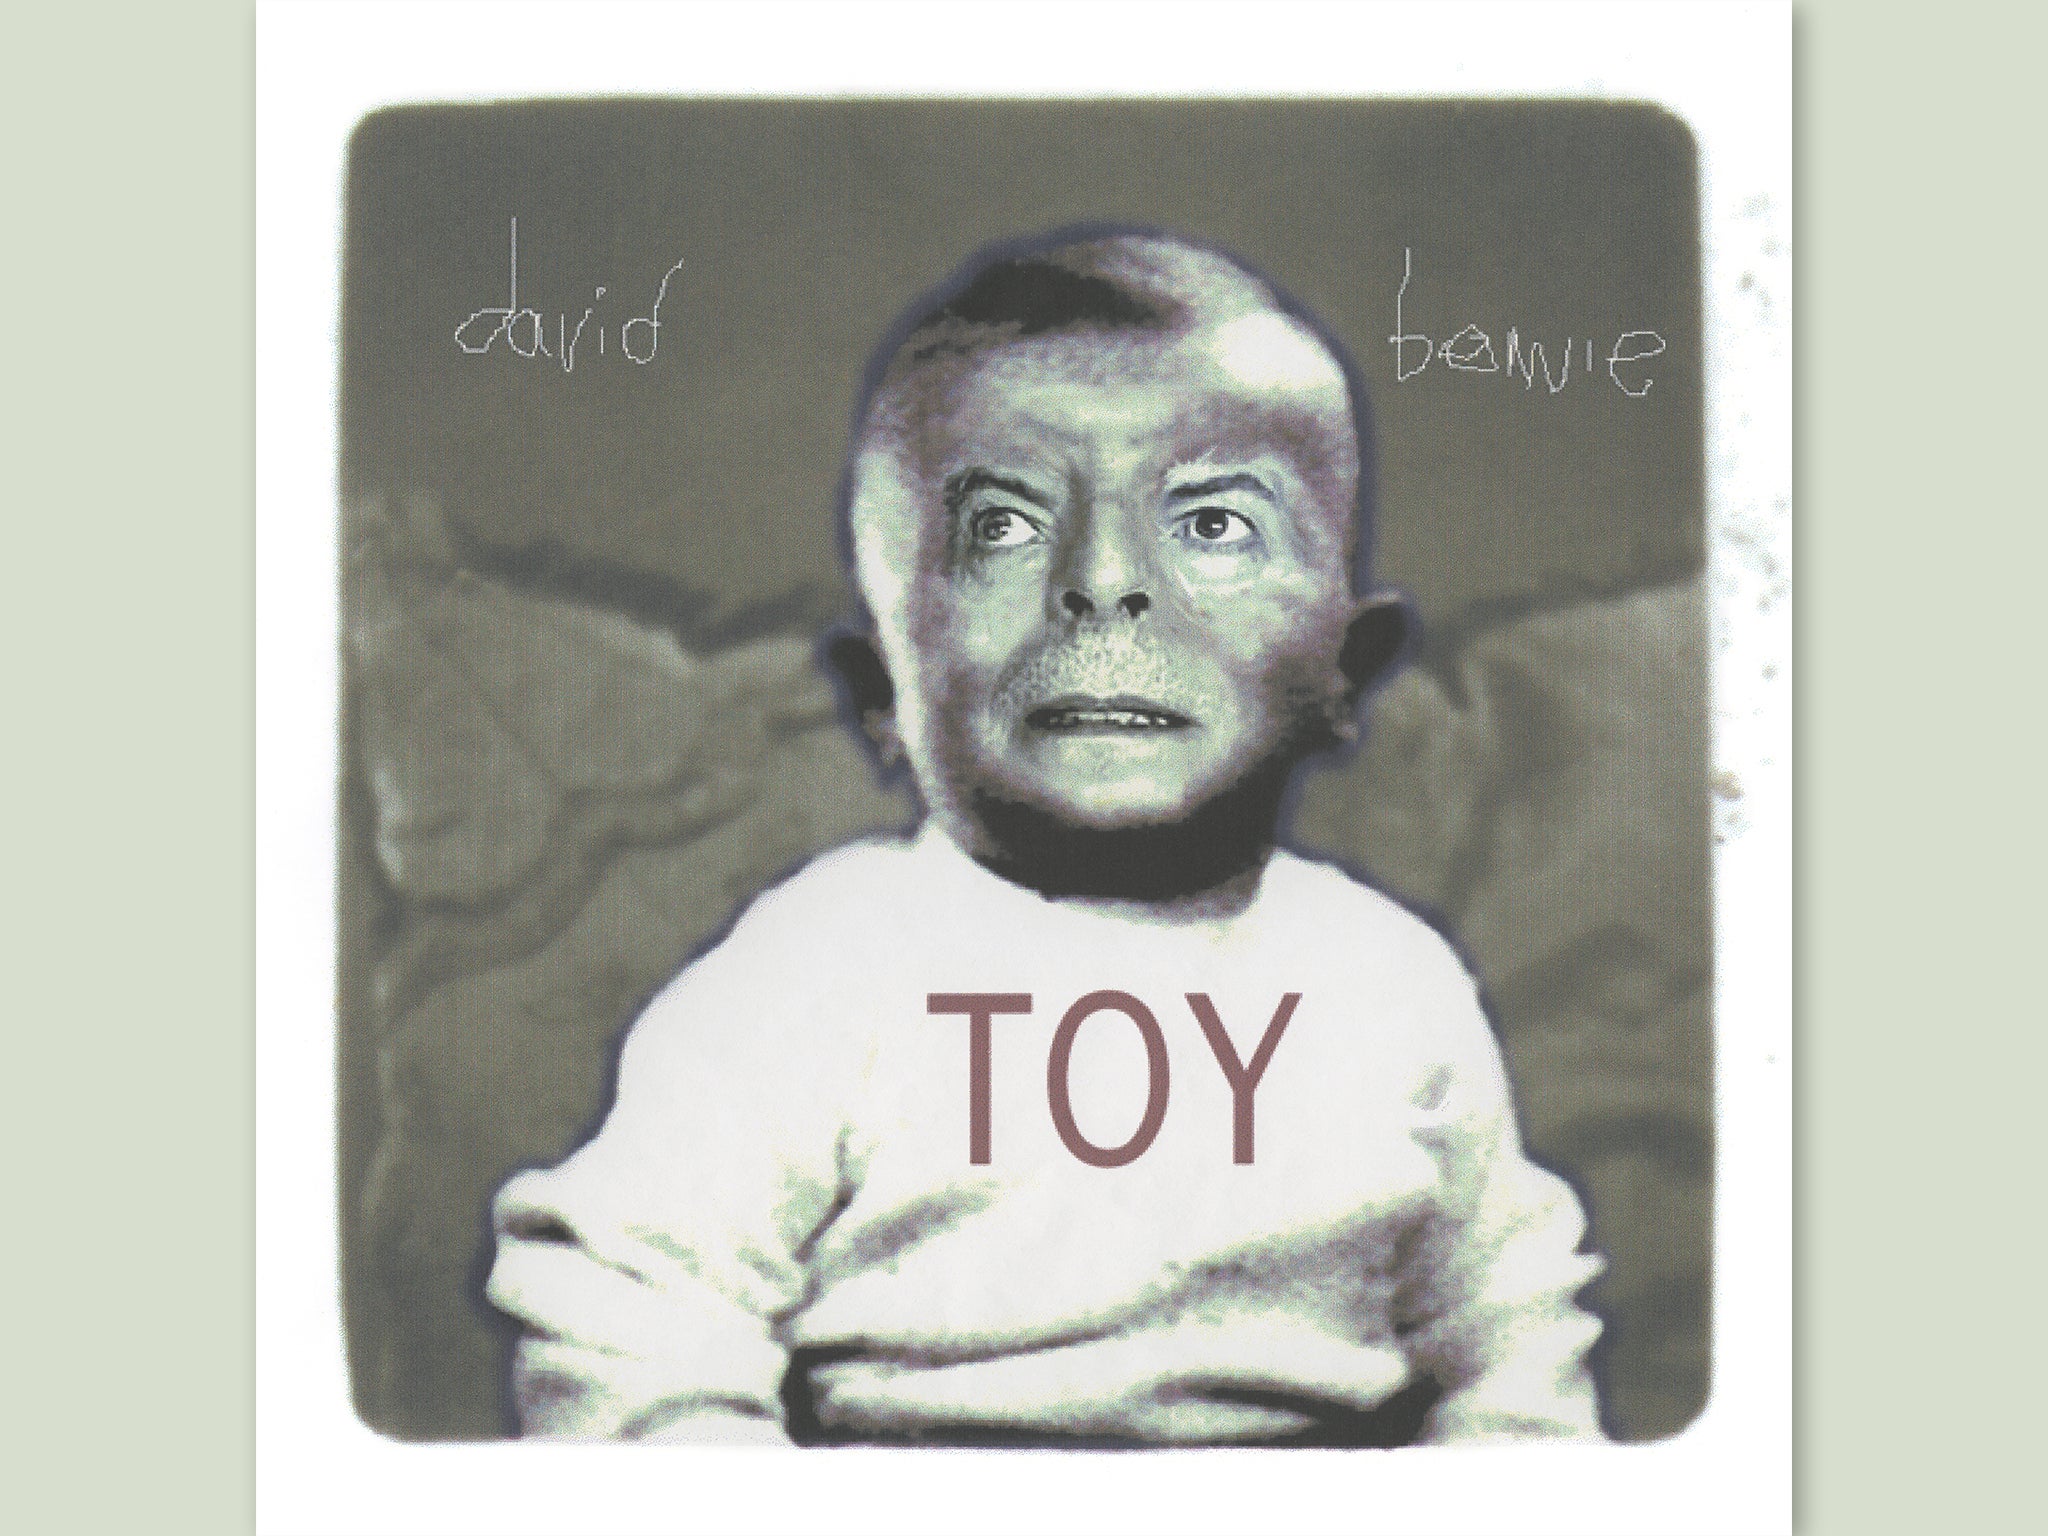 Cover art for David Bowie’s ‘Toy'